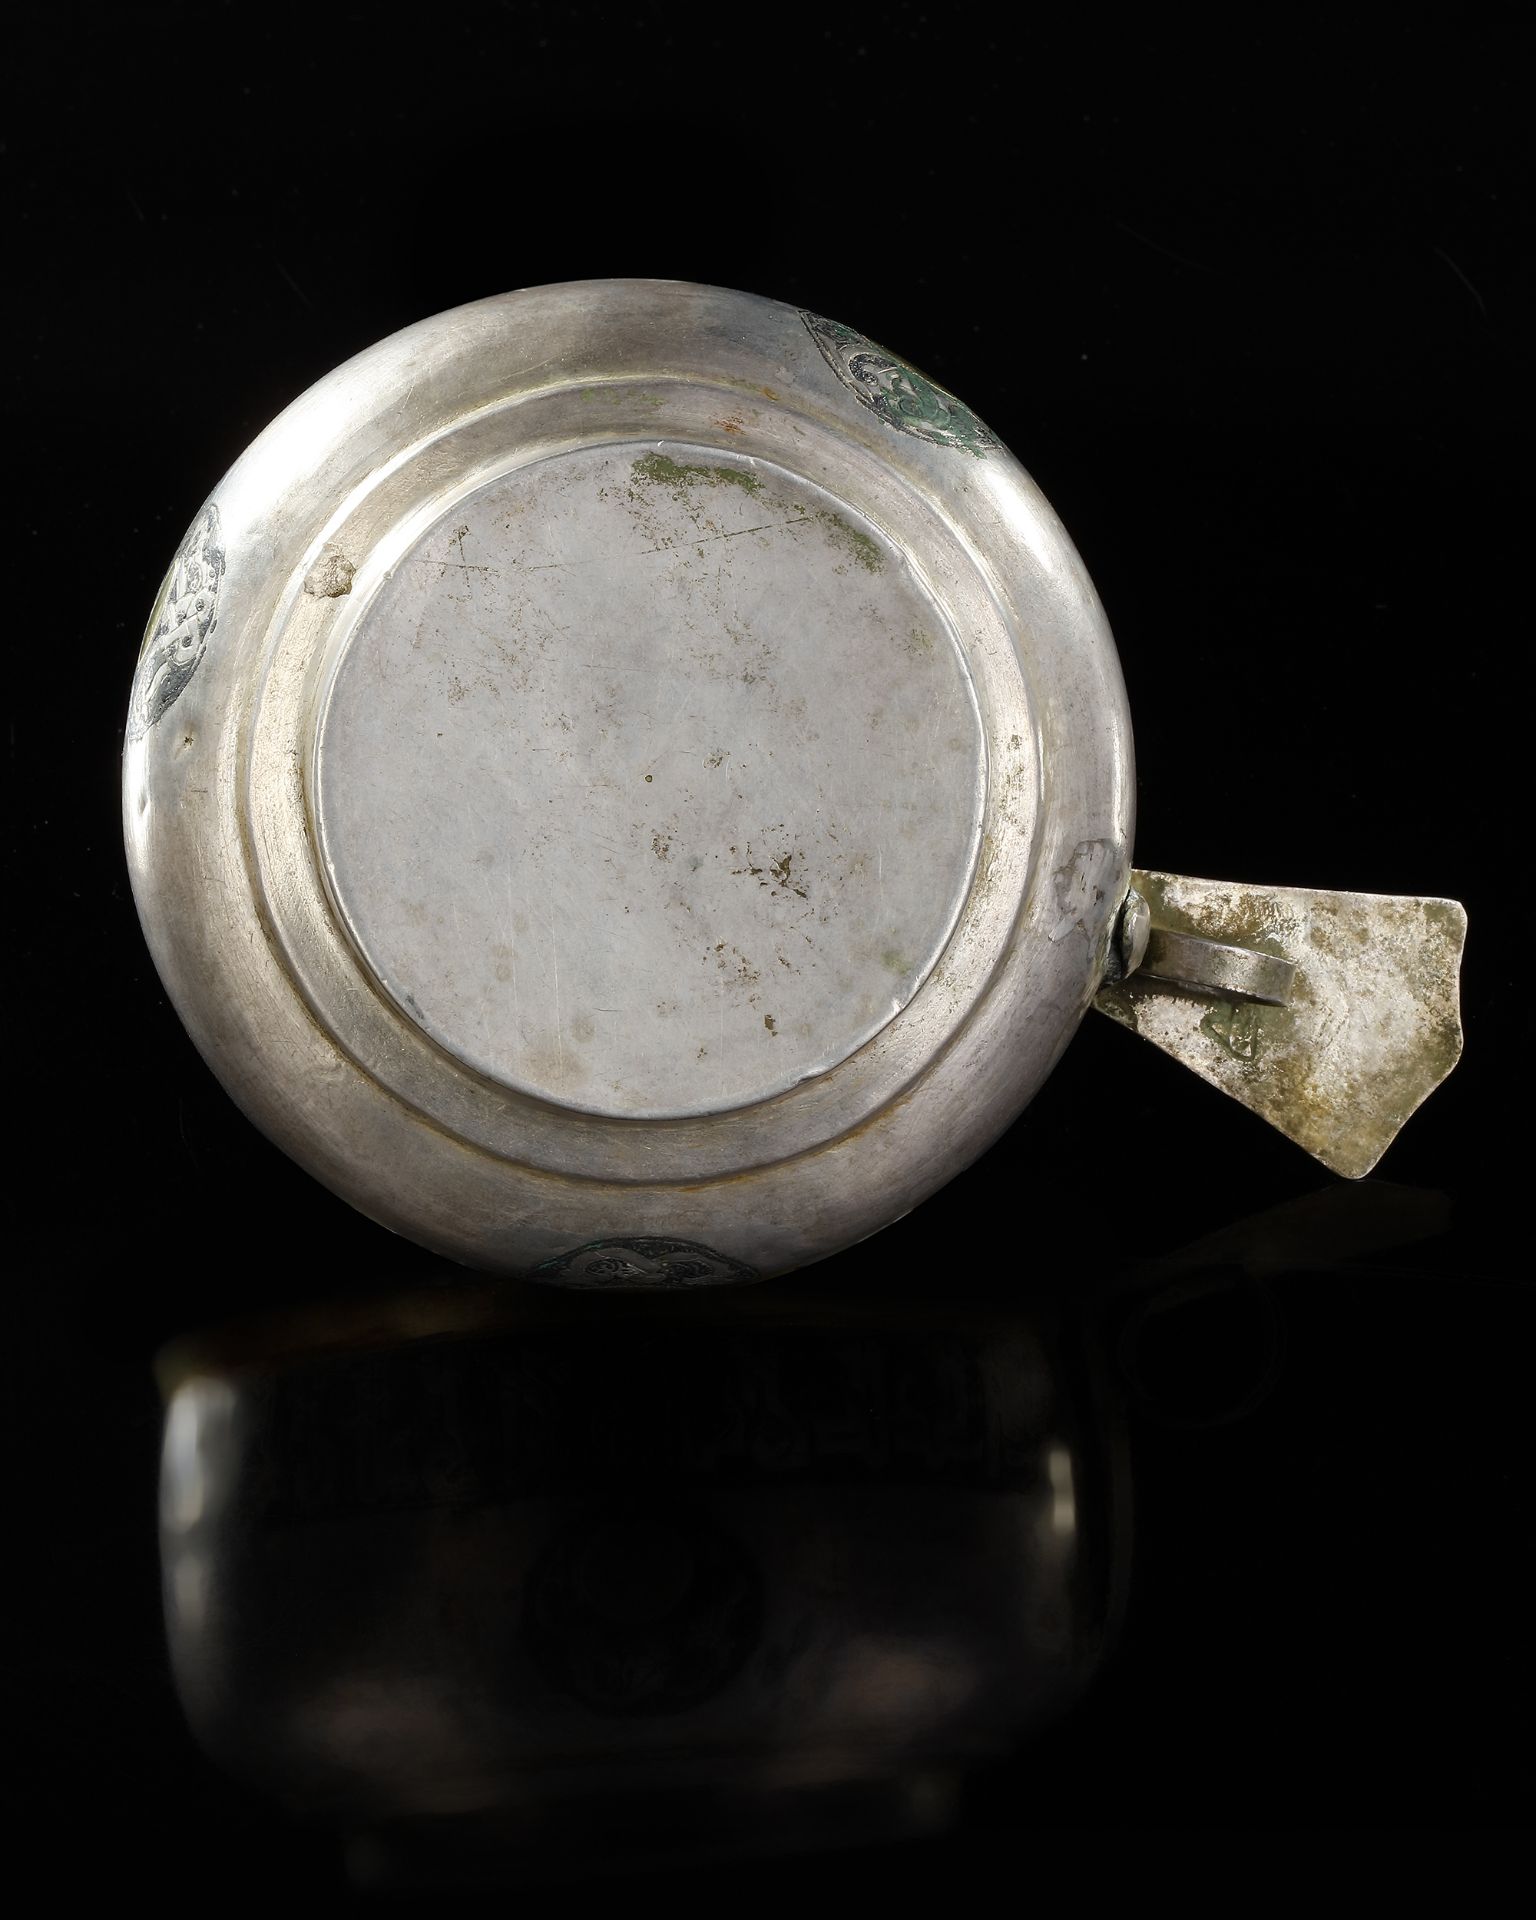 A RARE SILVER AND NIELLOED CUP WITH KUFIC INSCRIPTION, PERSIA OR CENTRAL ASIA, 11TH-12TH CENTURY - Image 22 of 34